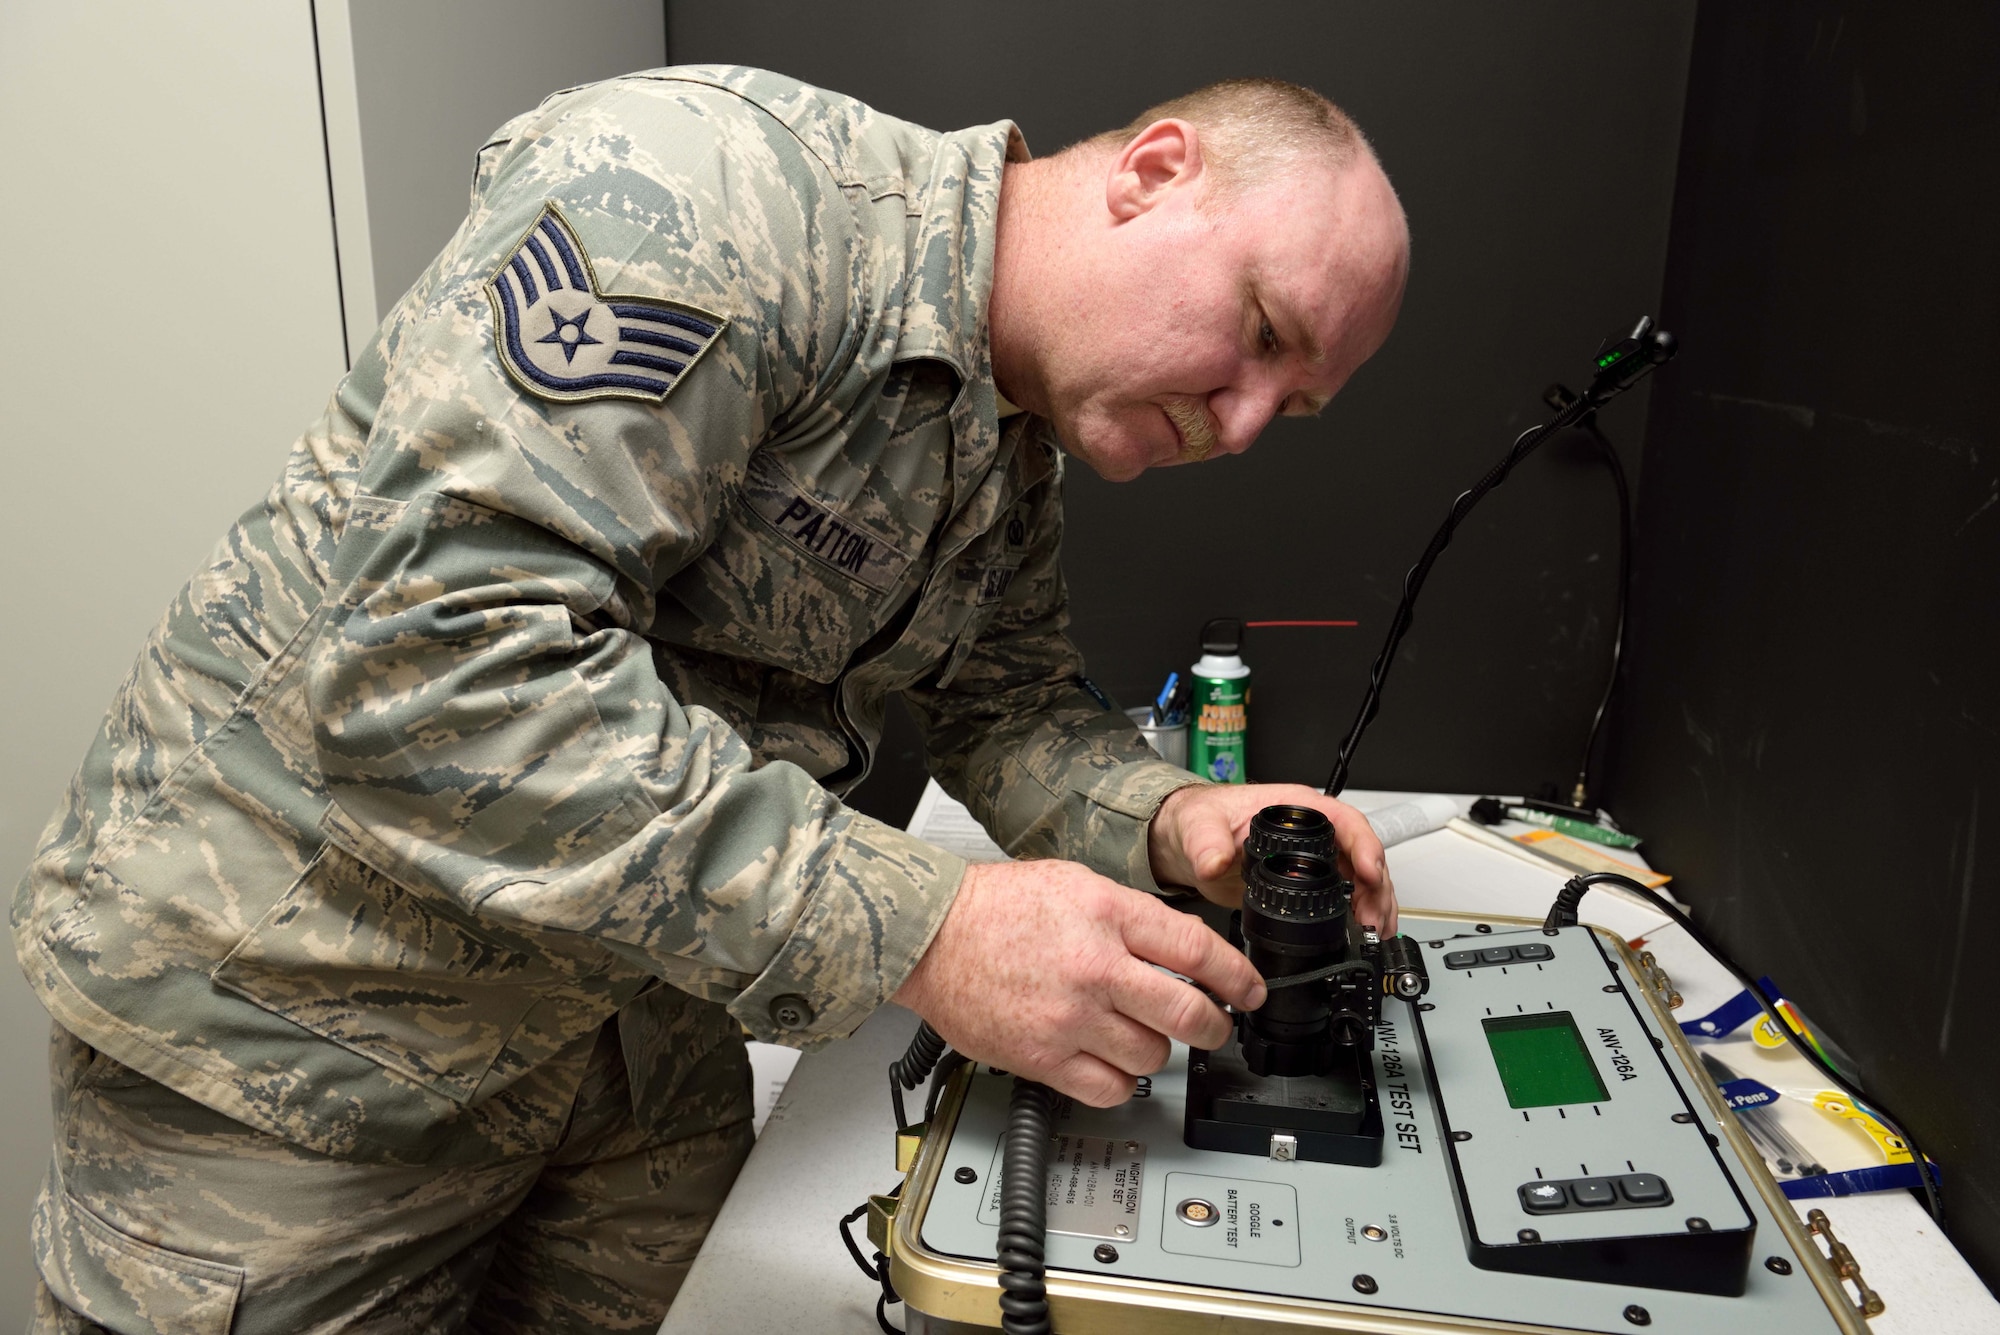 Staff Sgt. Ronald Patton, 403rd Operational Support Squadron aircrew flight equipment craftsman, prepares to inspect a set of night vision goggles used by 815th Airlift Squadron flight crews at Keesler Air Force Base, Mississippi, Jan. 10, 2016. Patton was one of several 403rd Wing members who served in the military during Operations Desert Shield and Desert Storm 25 years ago. (U.S. Air Force photo/Tec. Sgt. Ryan Labadens)